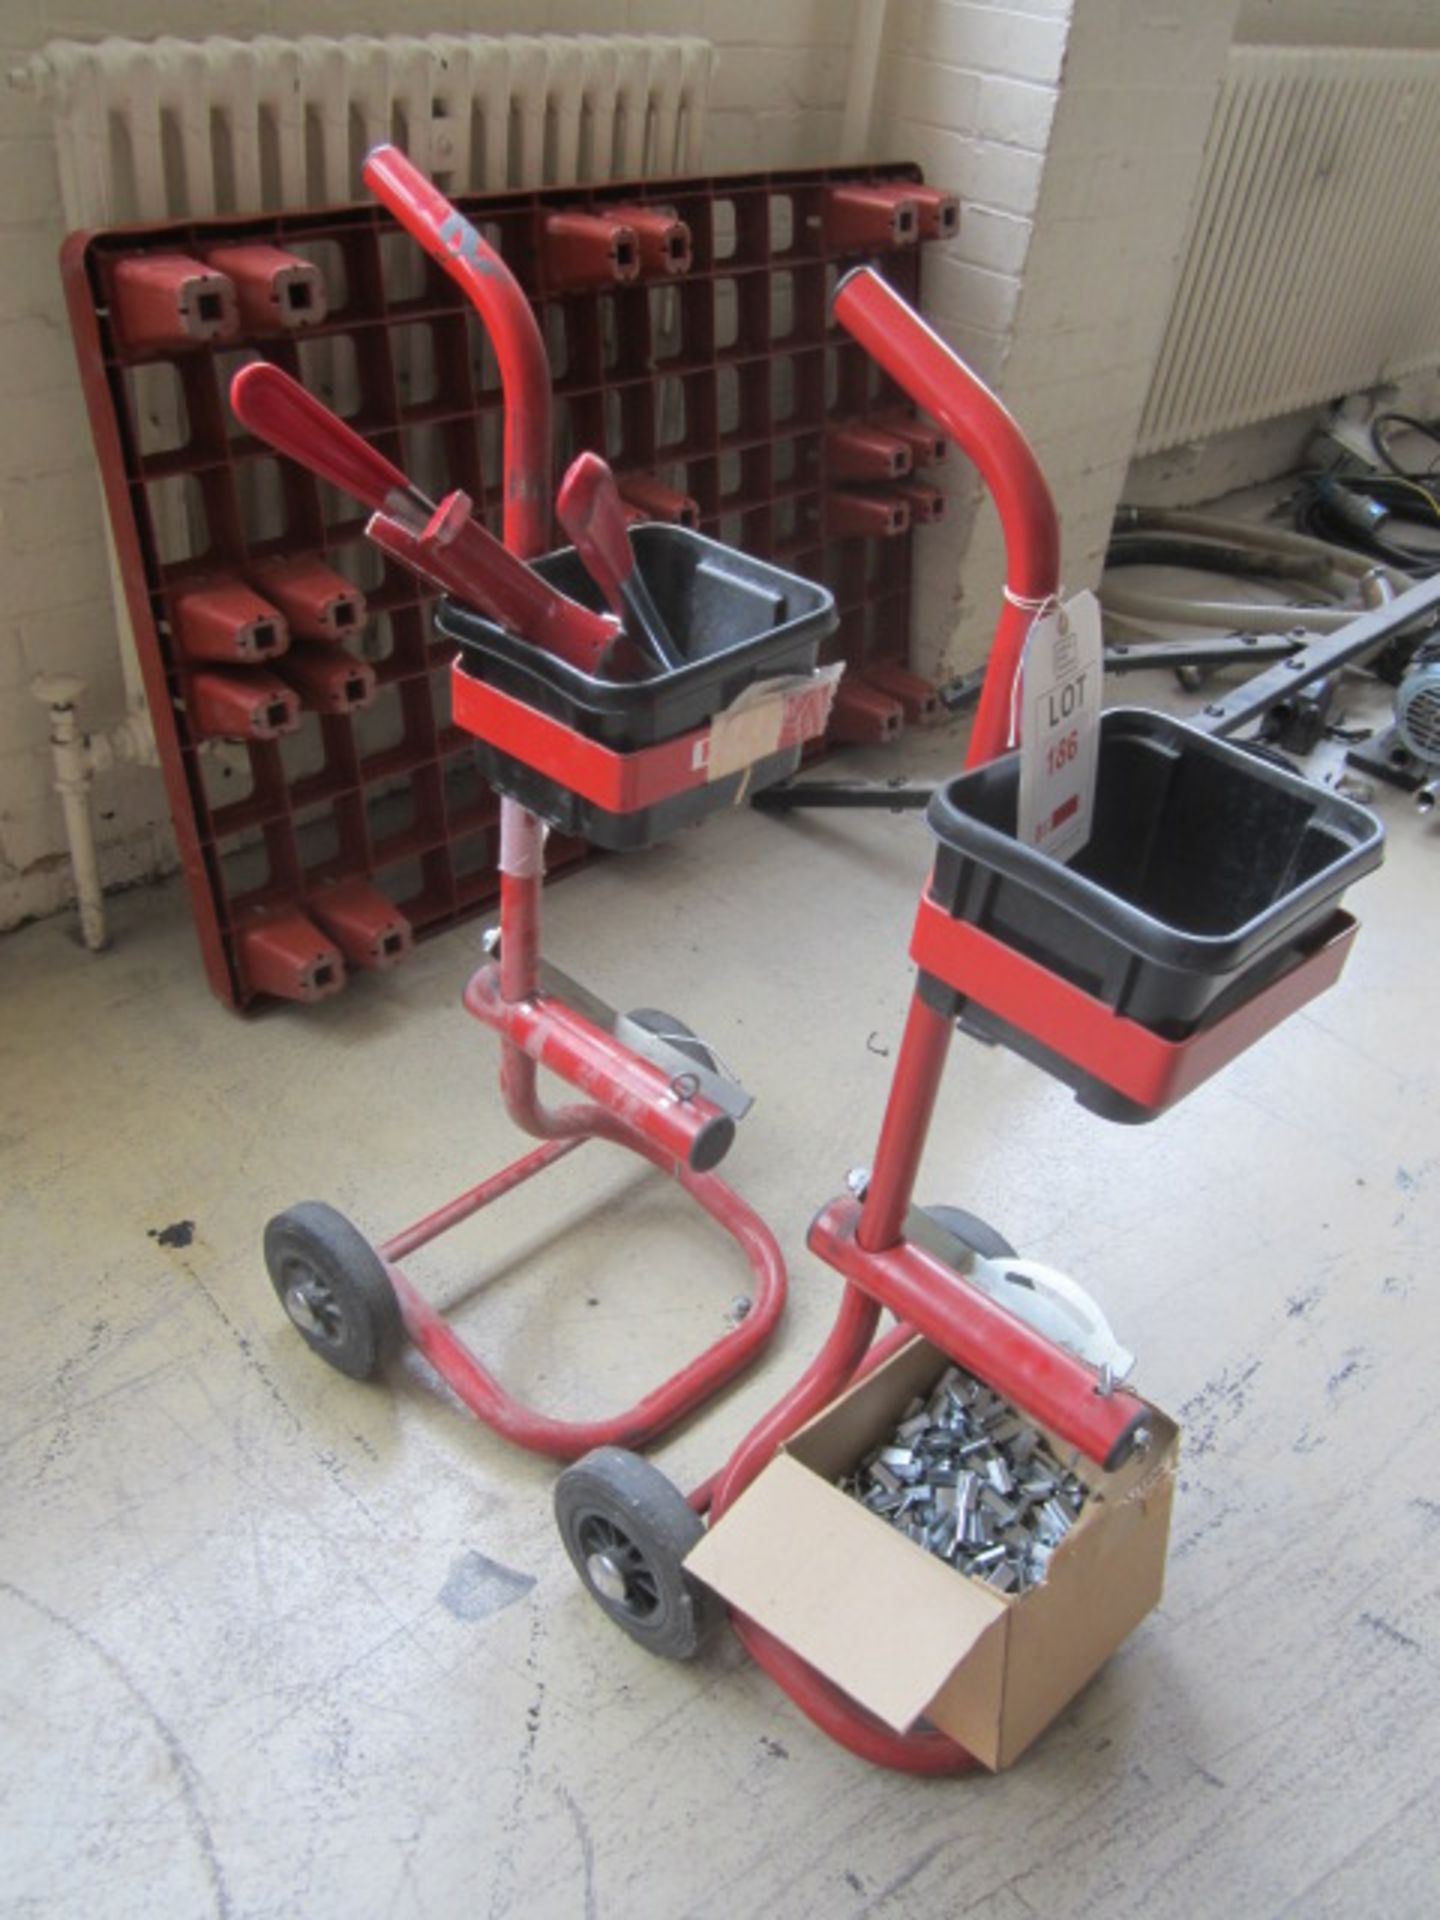 2 x banding trolleys with bander and crimper. - Lift out charge to be applied: £5+ vat